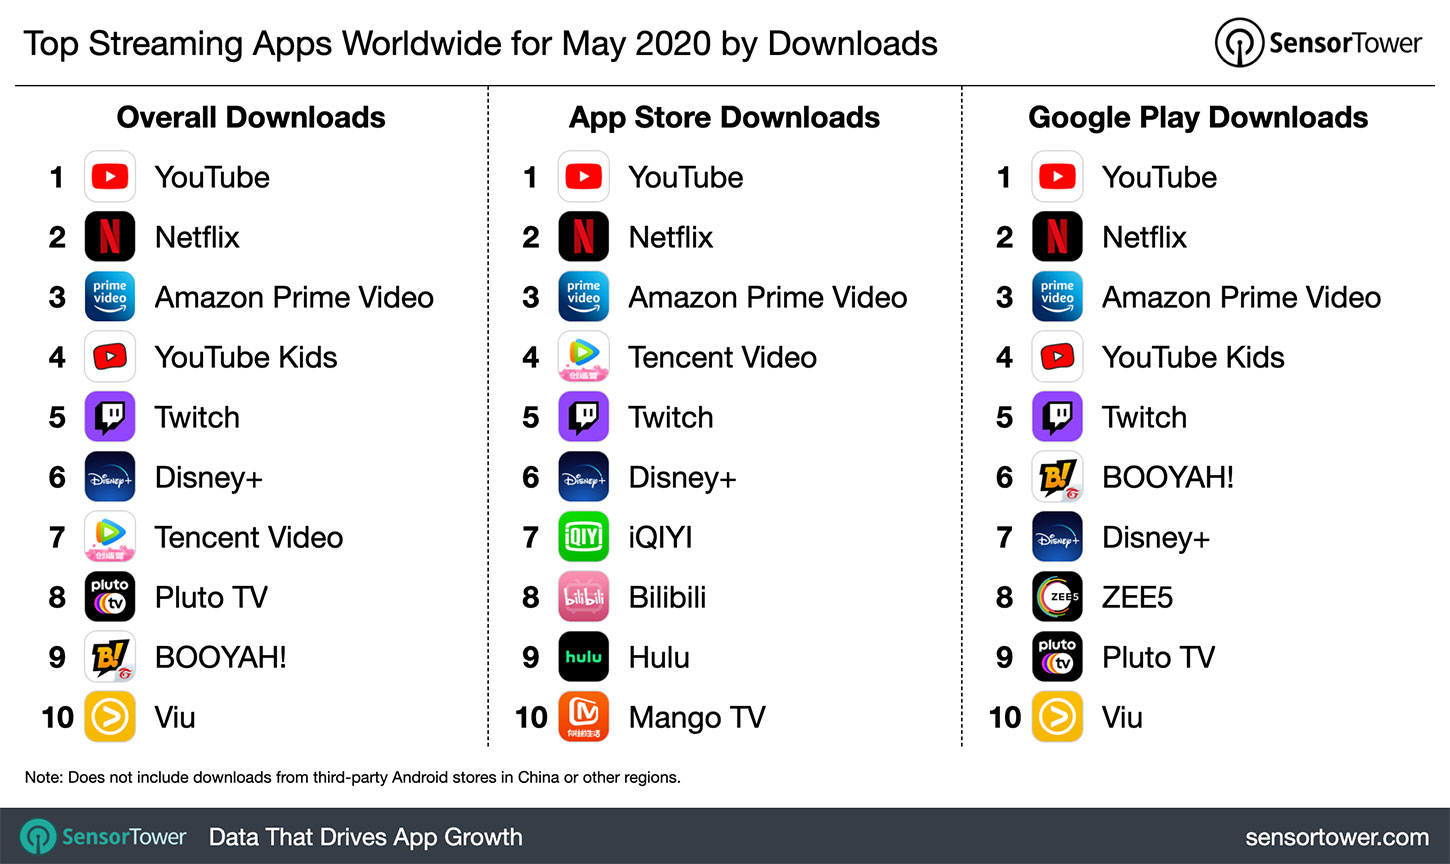 Top Streaming Apps Worldwide for May 2020 by Downloads